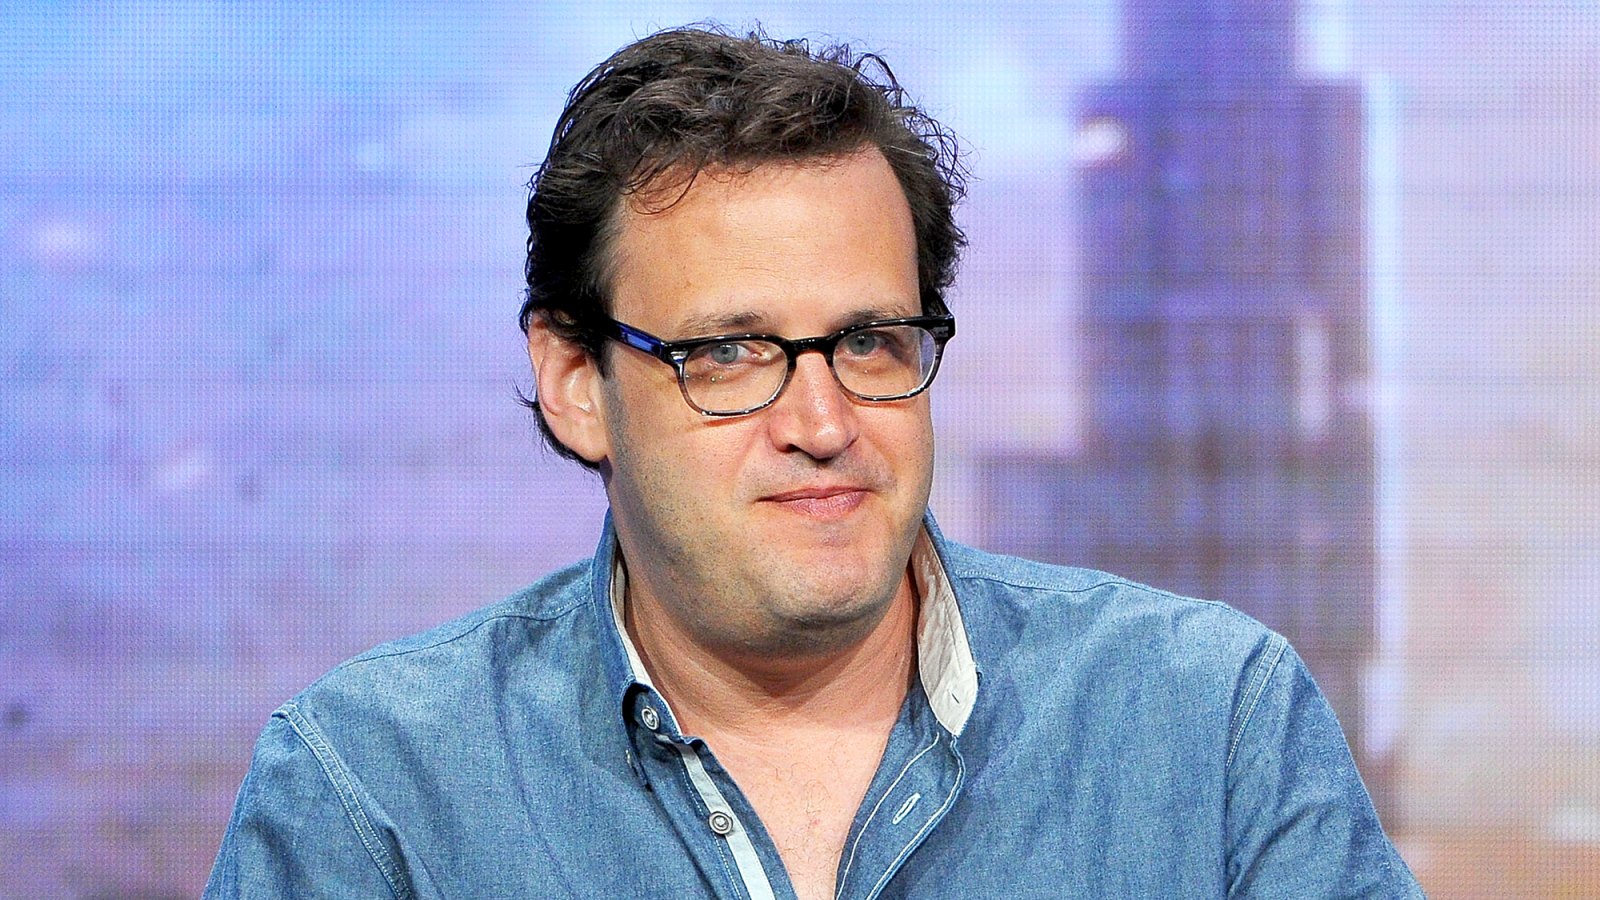 Andrew Kreisberg attends the 2016 Television Critics Association Summer Tour at The Beverly Hilton Hotel in Beverly Hills, California.